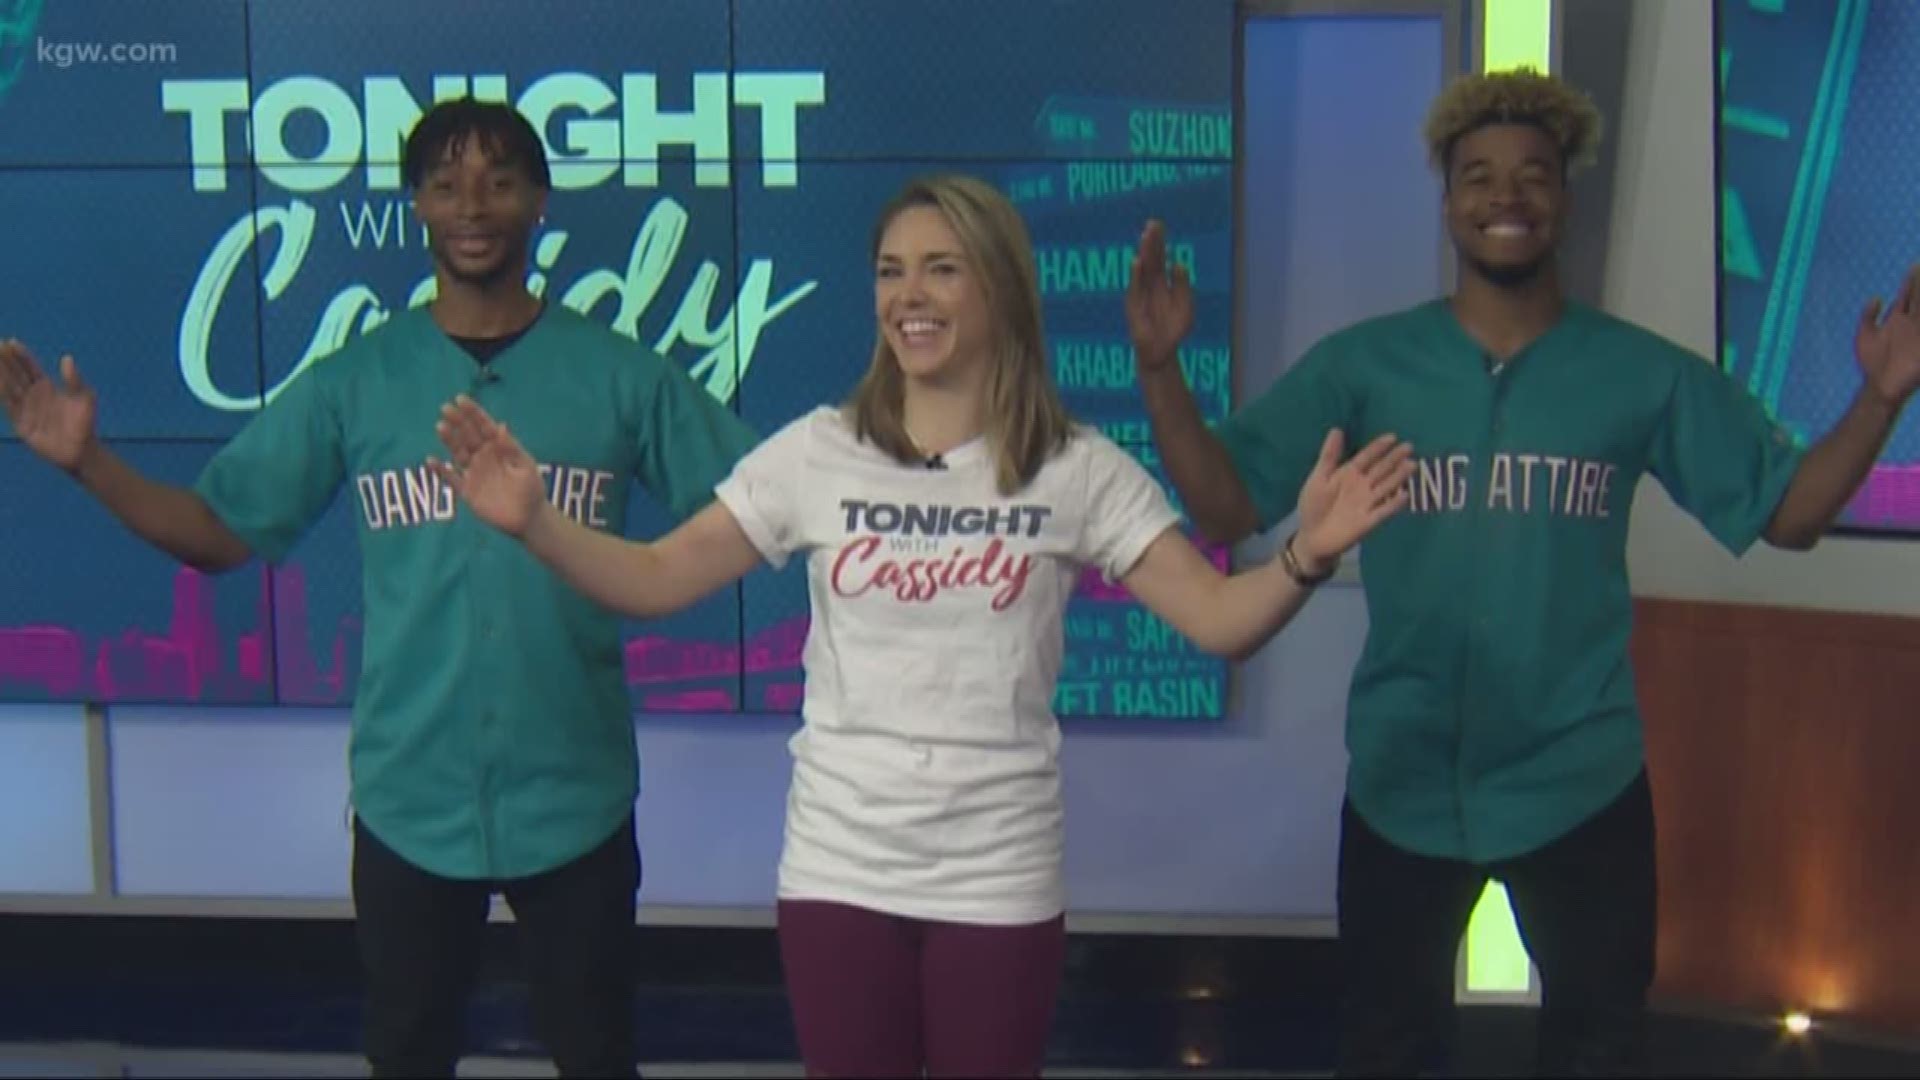 BDash and Konkrete teach Cassidy how to krump as they get ready for the World of Dance Live tour stop at ilani nbc.com/world-of-dance#TonighwithCassidy